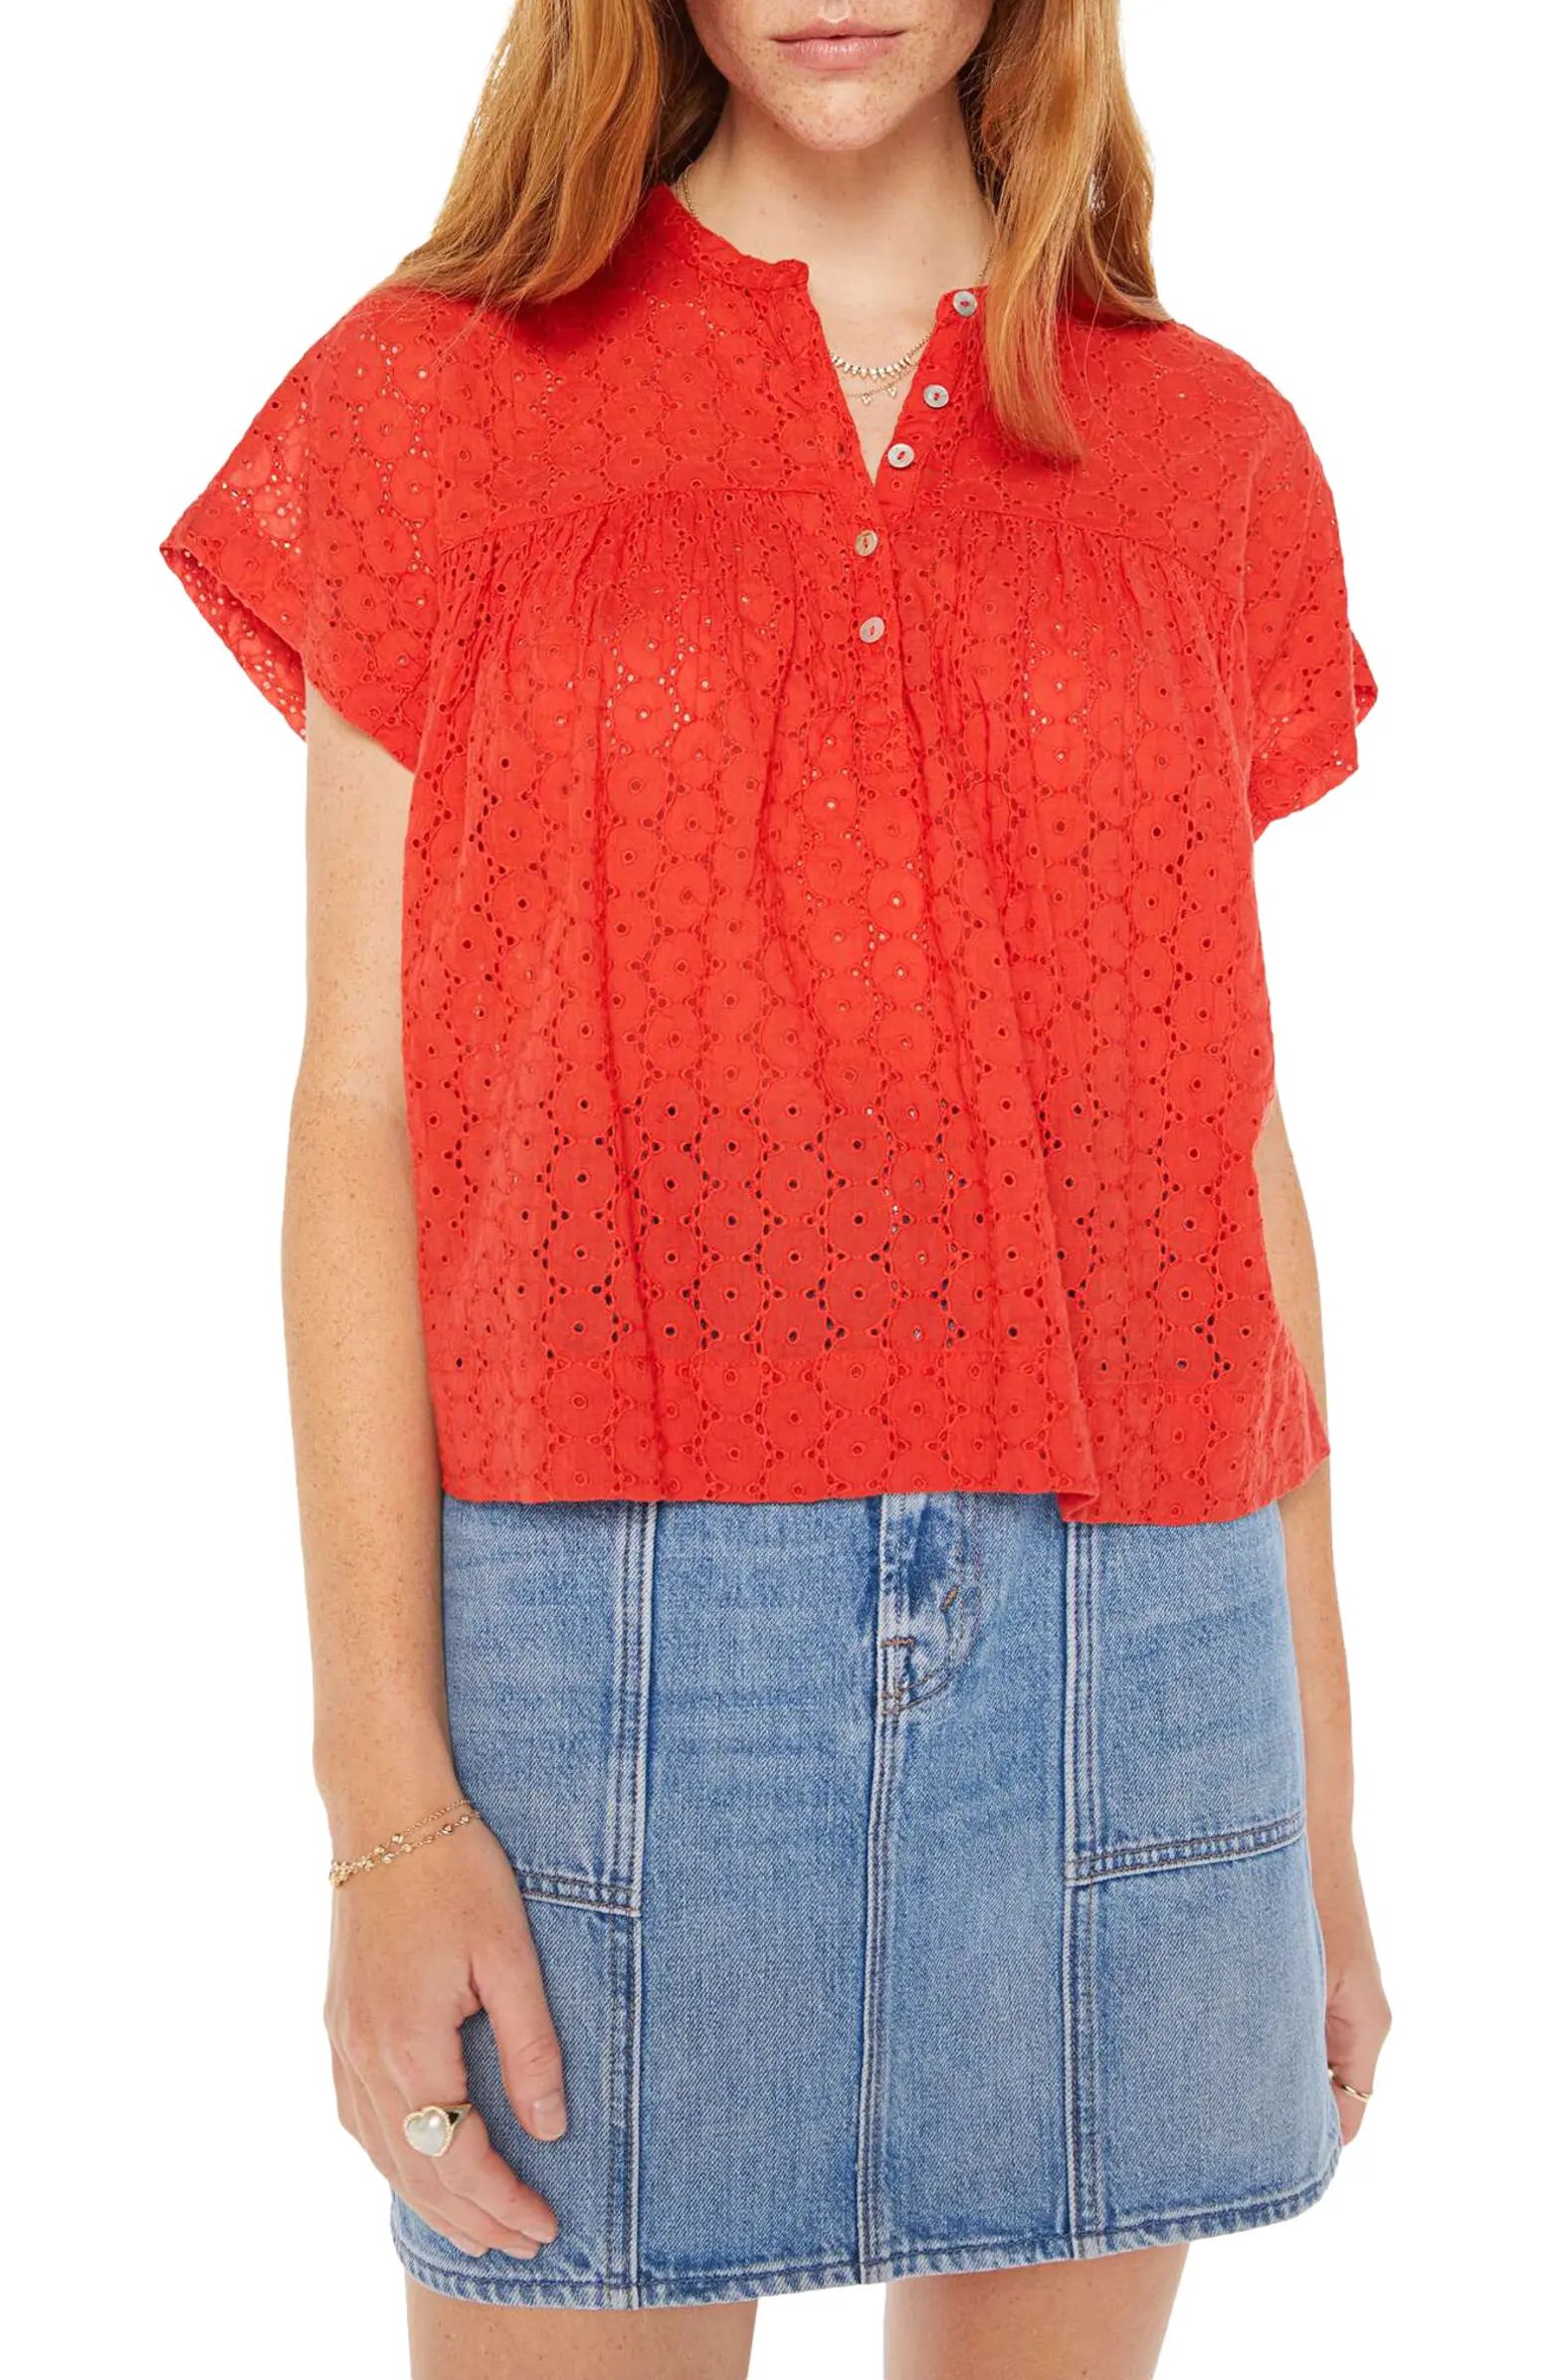 The Pop Your Top Cotton Eyelet Top | Nordstrom